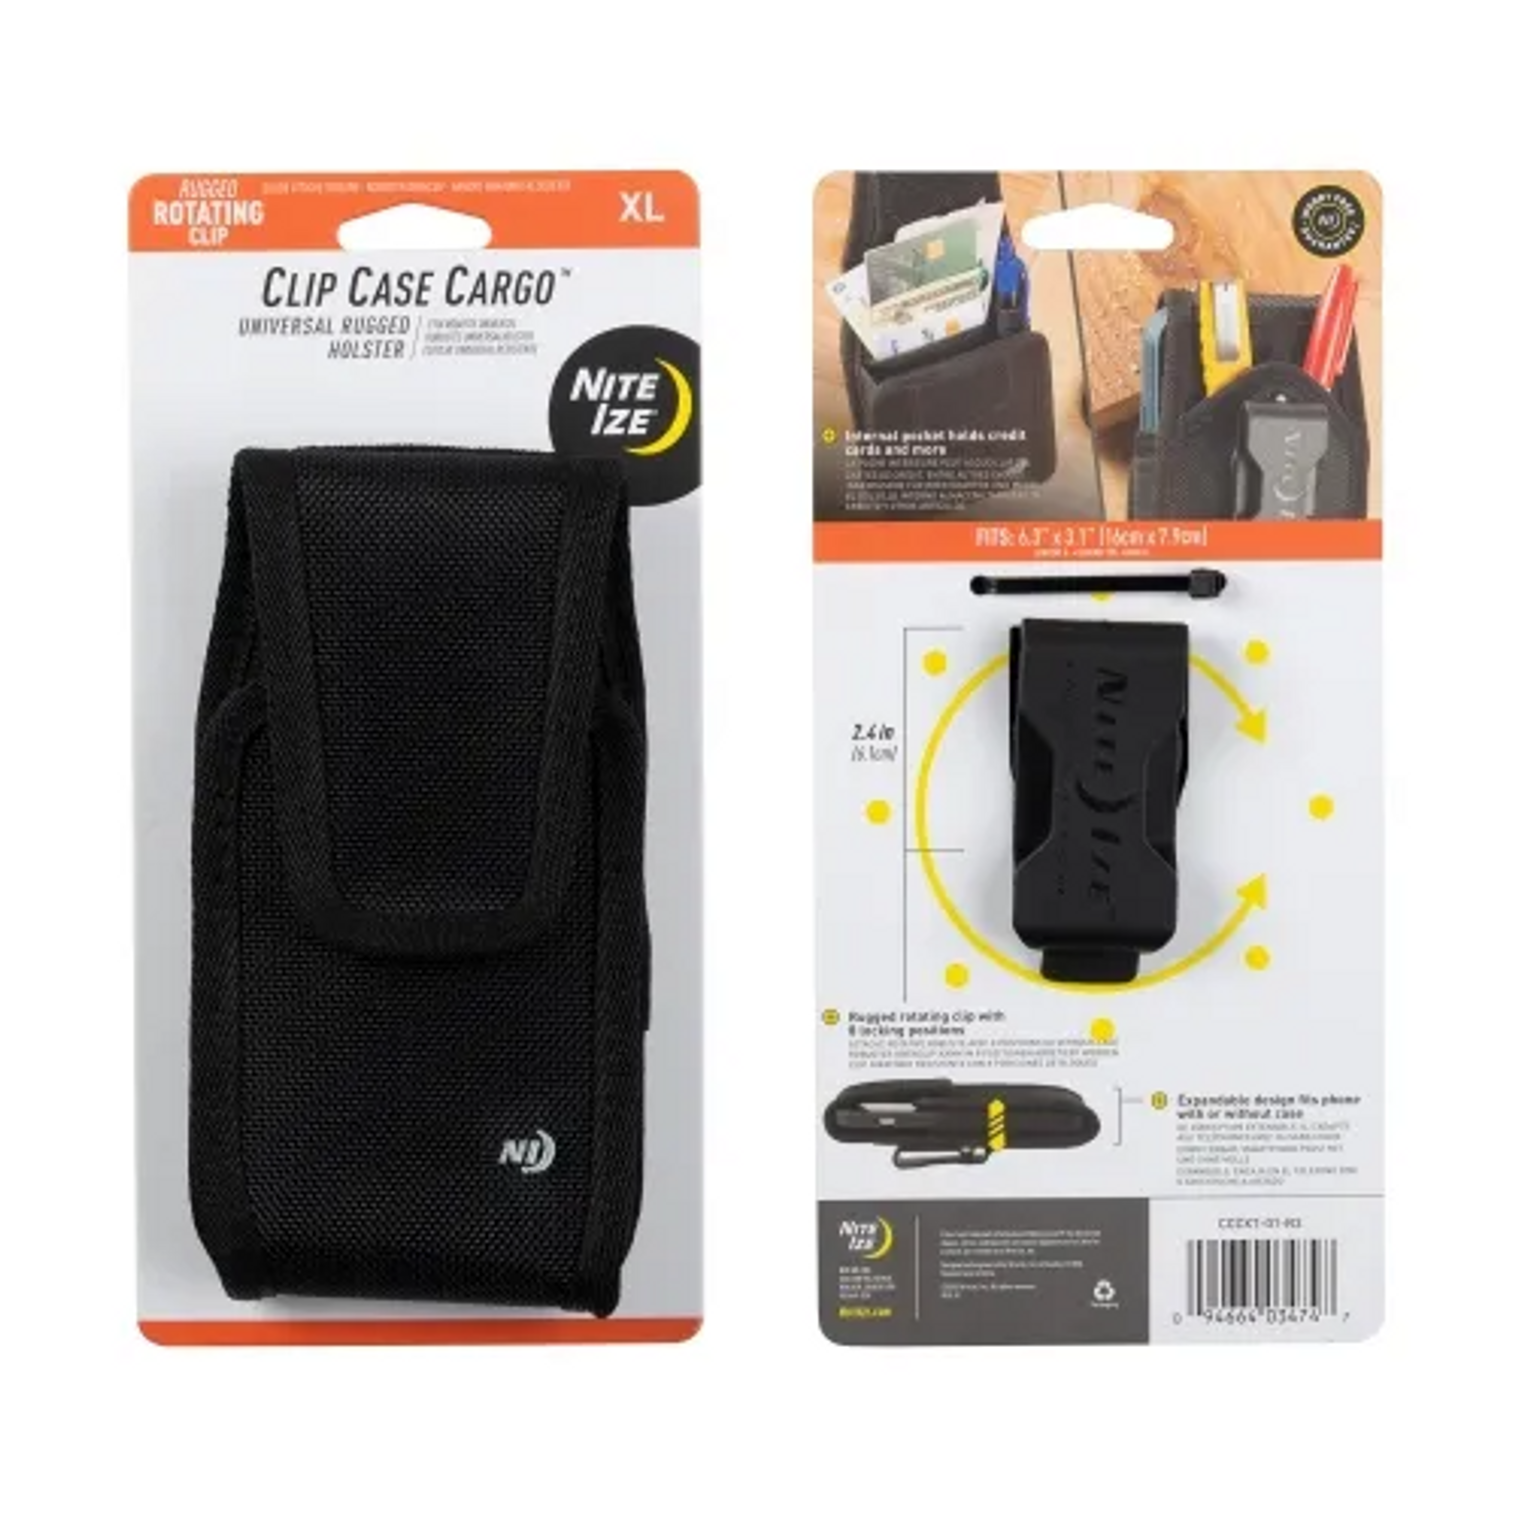 Clip Case Cargo Universal Rugged Holsters - KRNICCCXT-01-R3